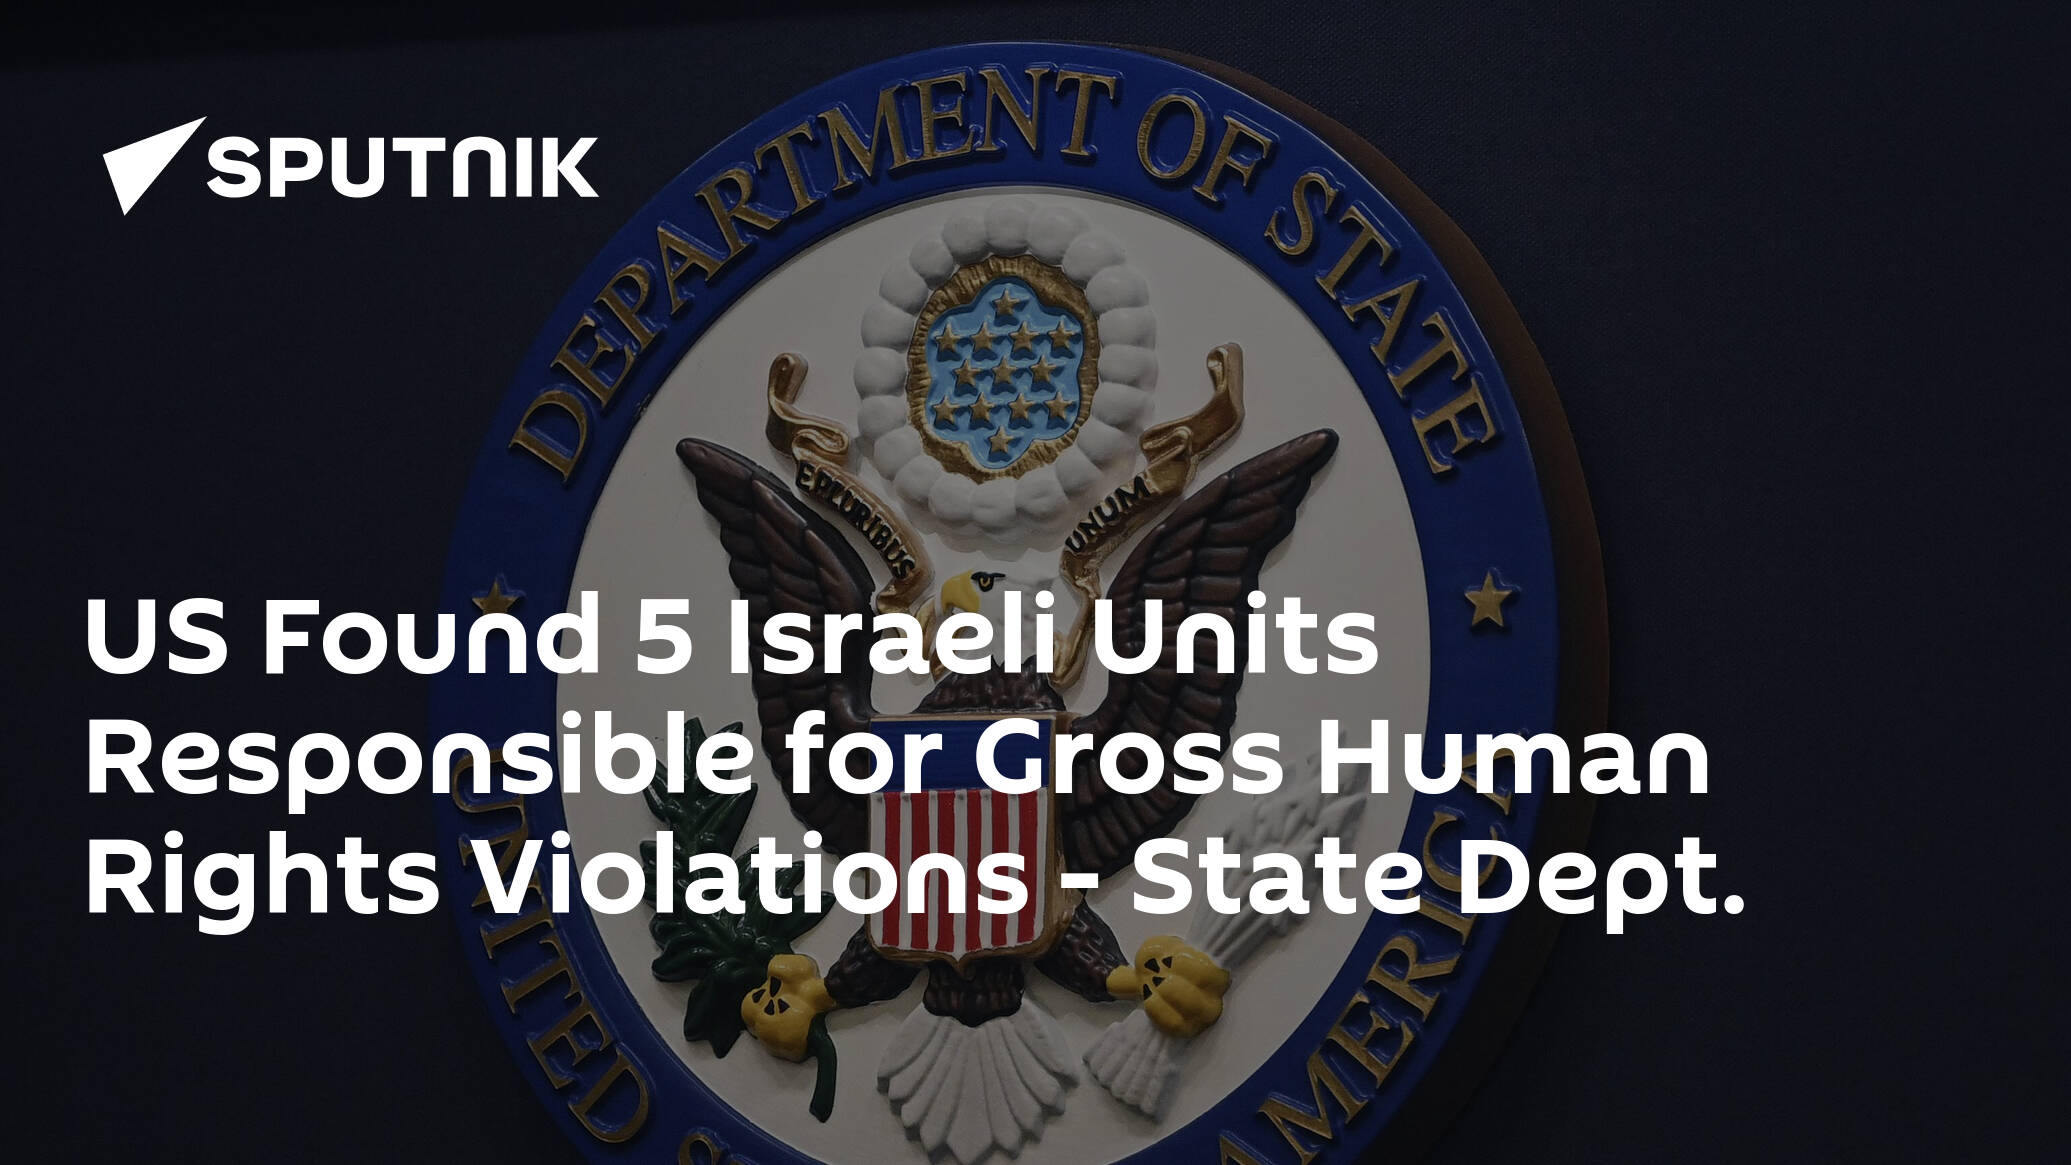 US Found 5 Israeli Units Responsible for Gross Human Rights Violations – State Dept.